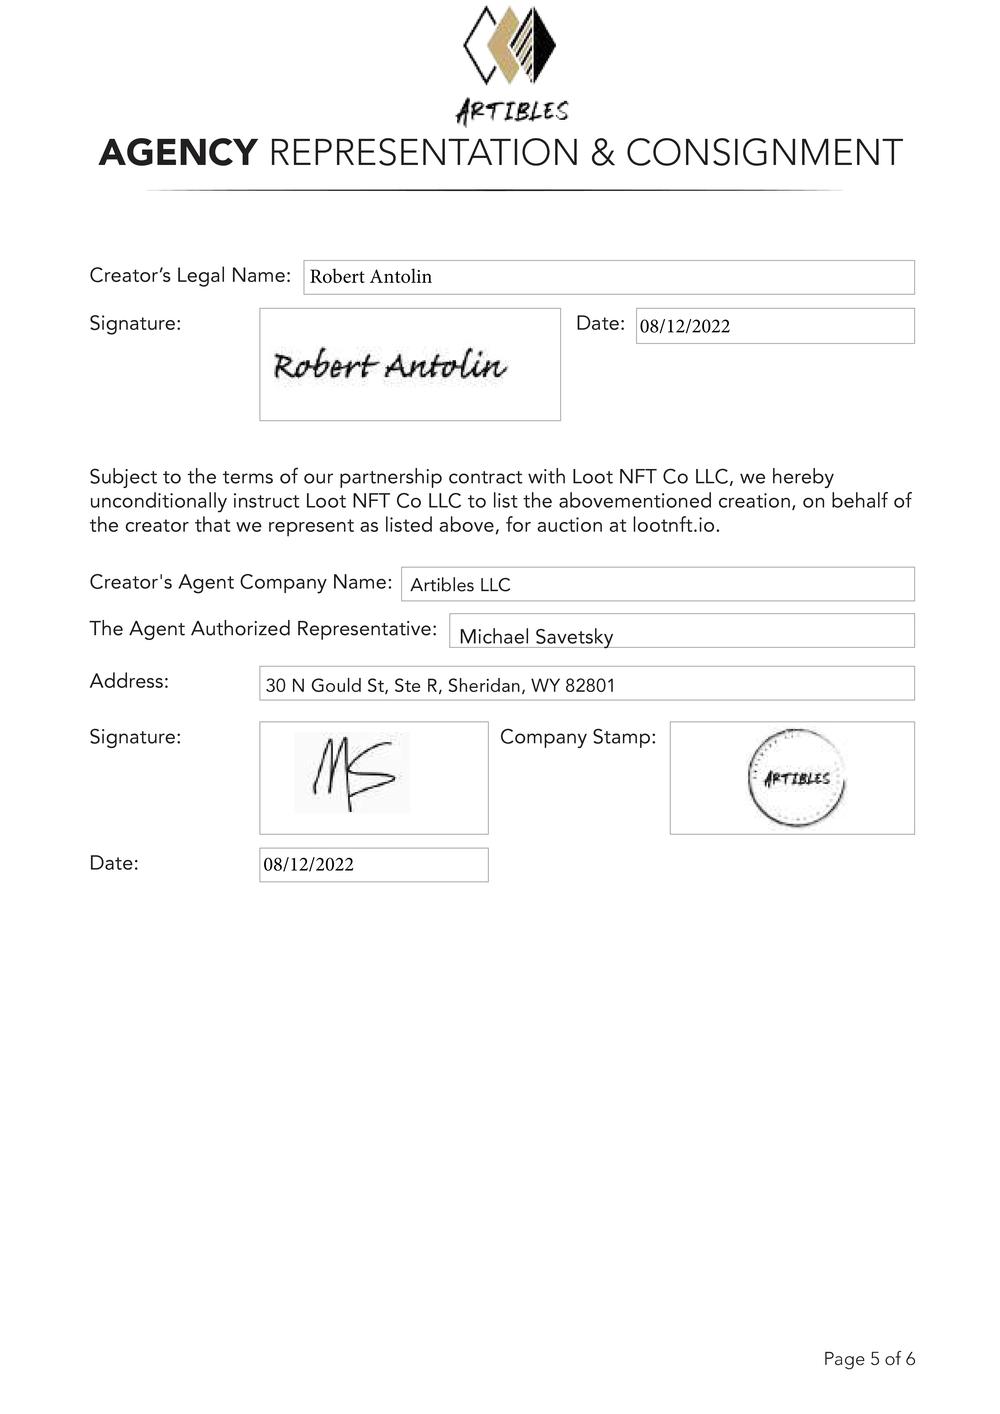 Certificate of Authenticity and Consignment - Eleven Ninety.pdf